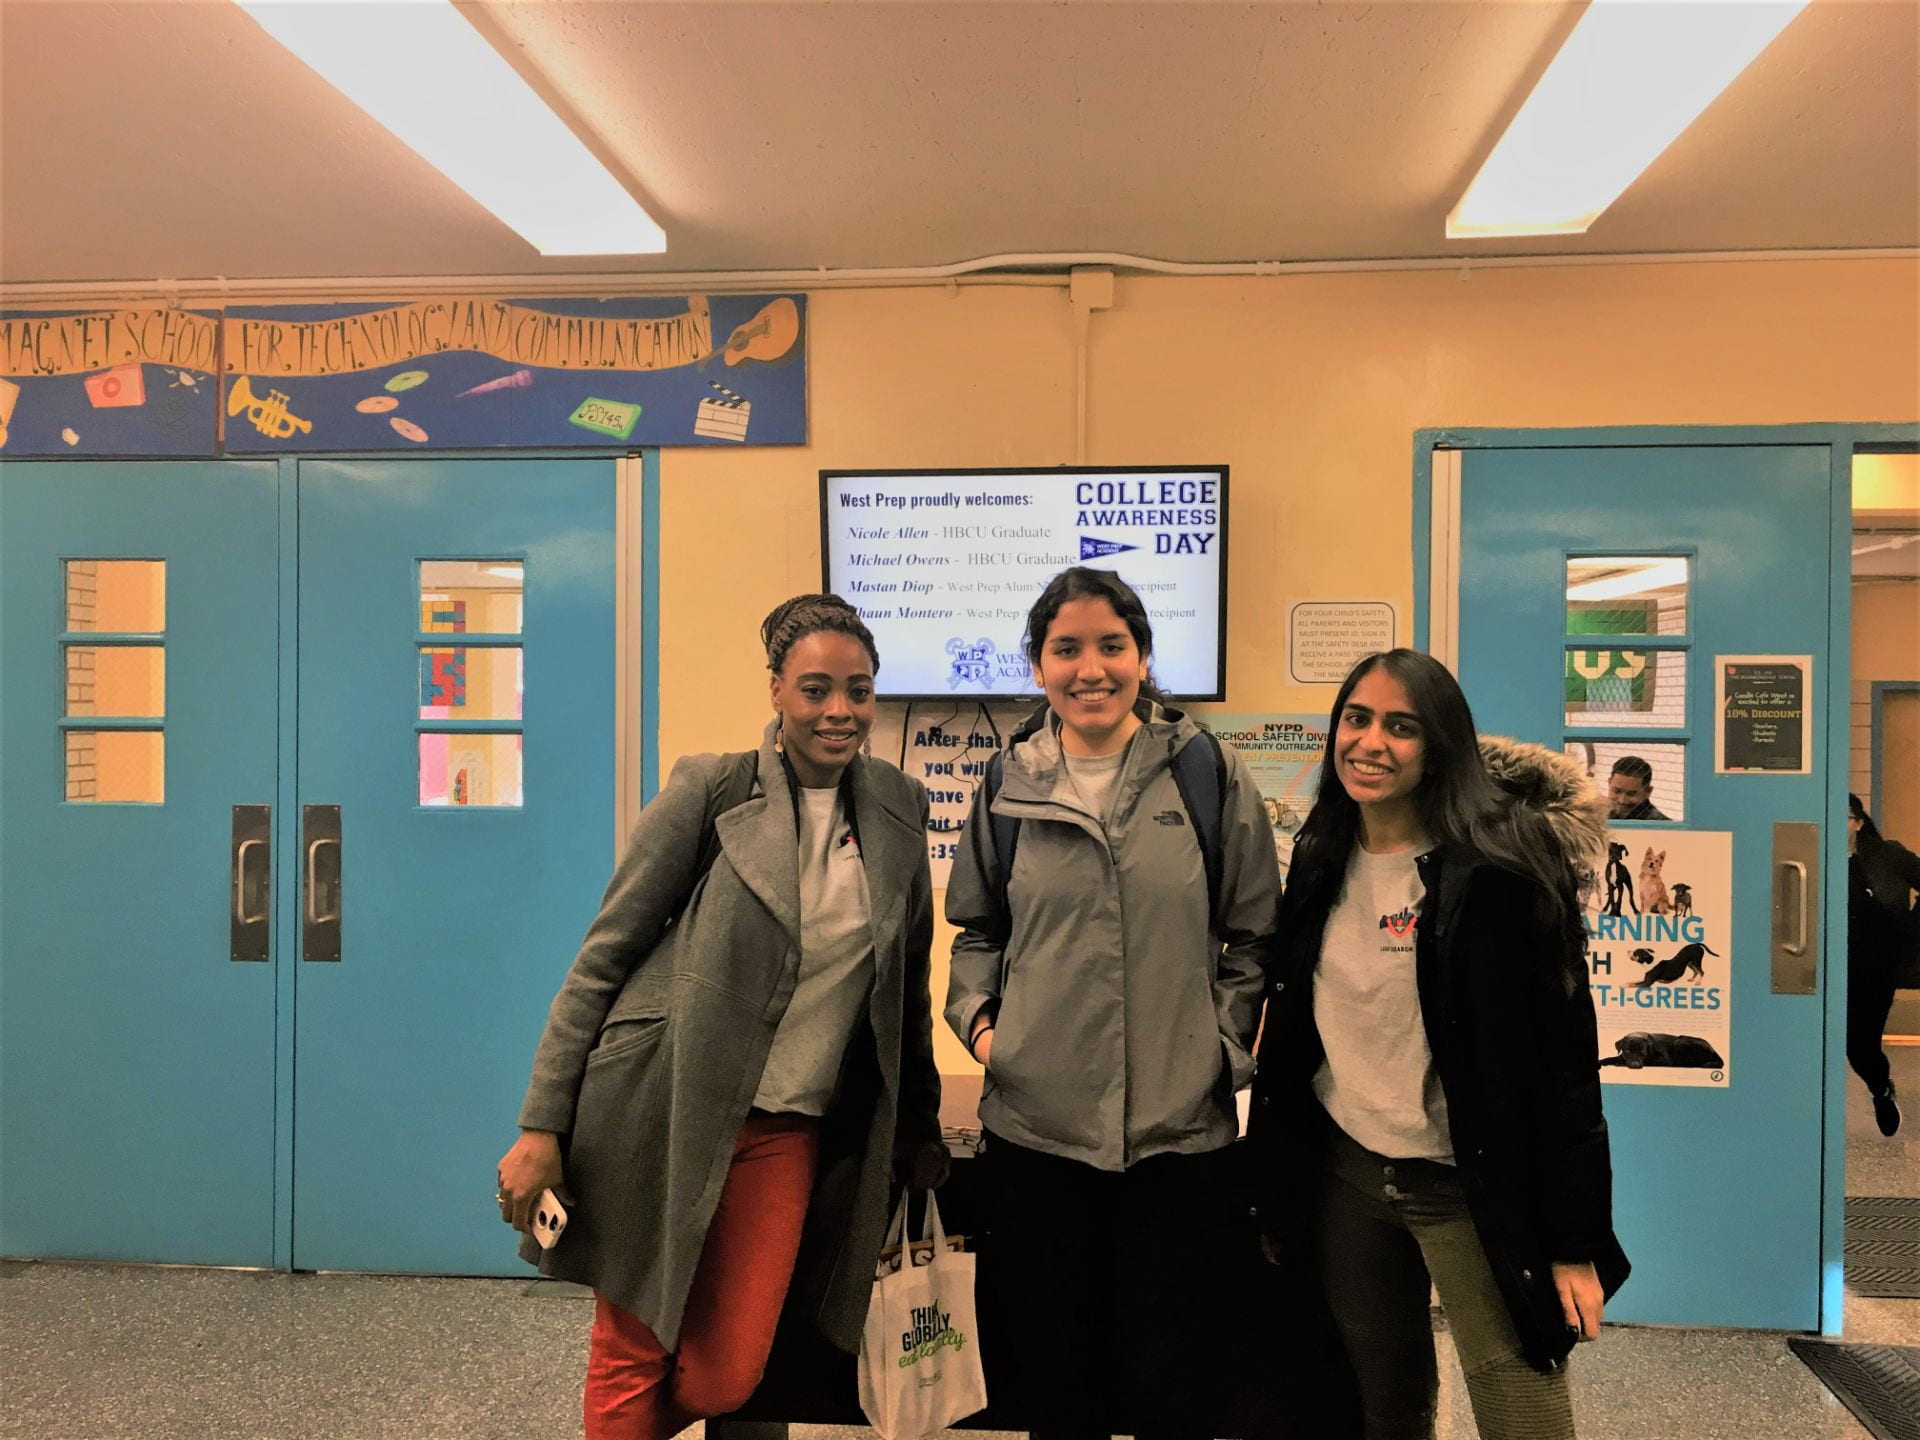 Our research team visited West Preparatory Academy in NYC